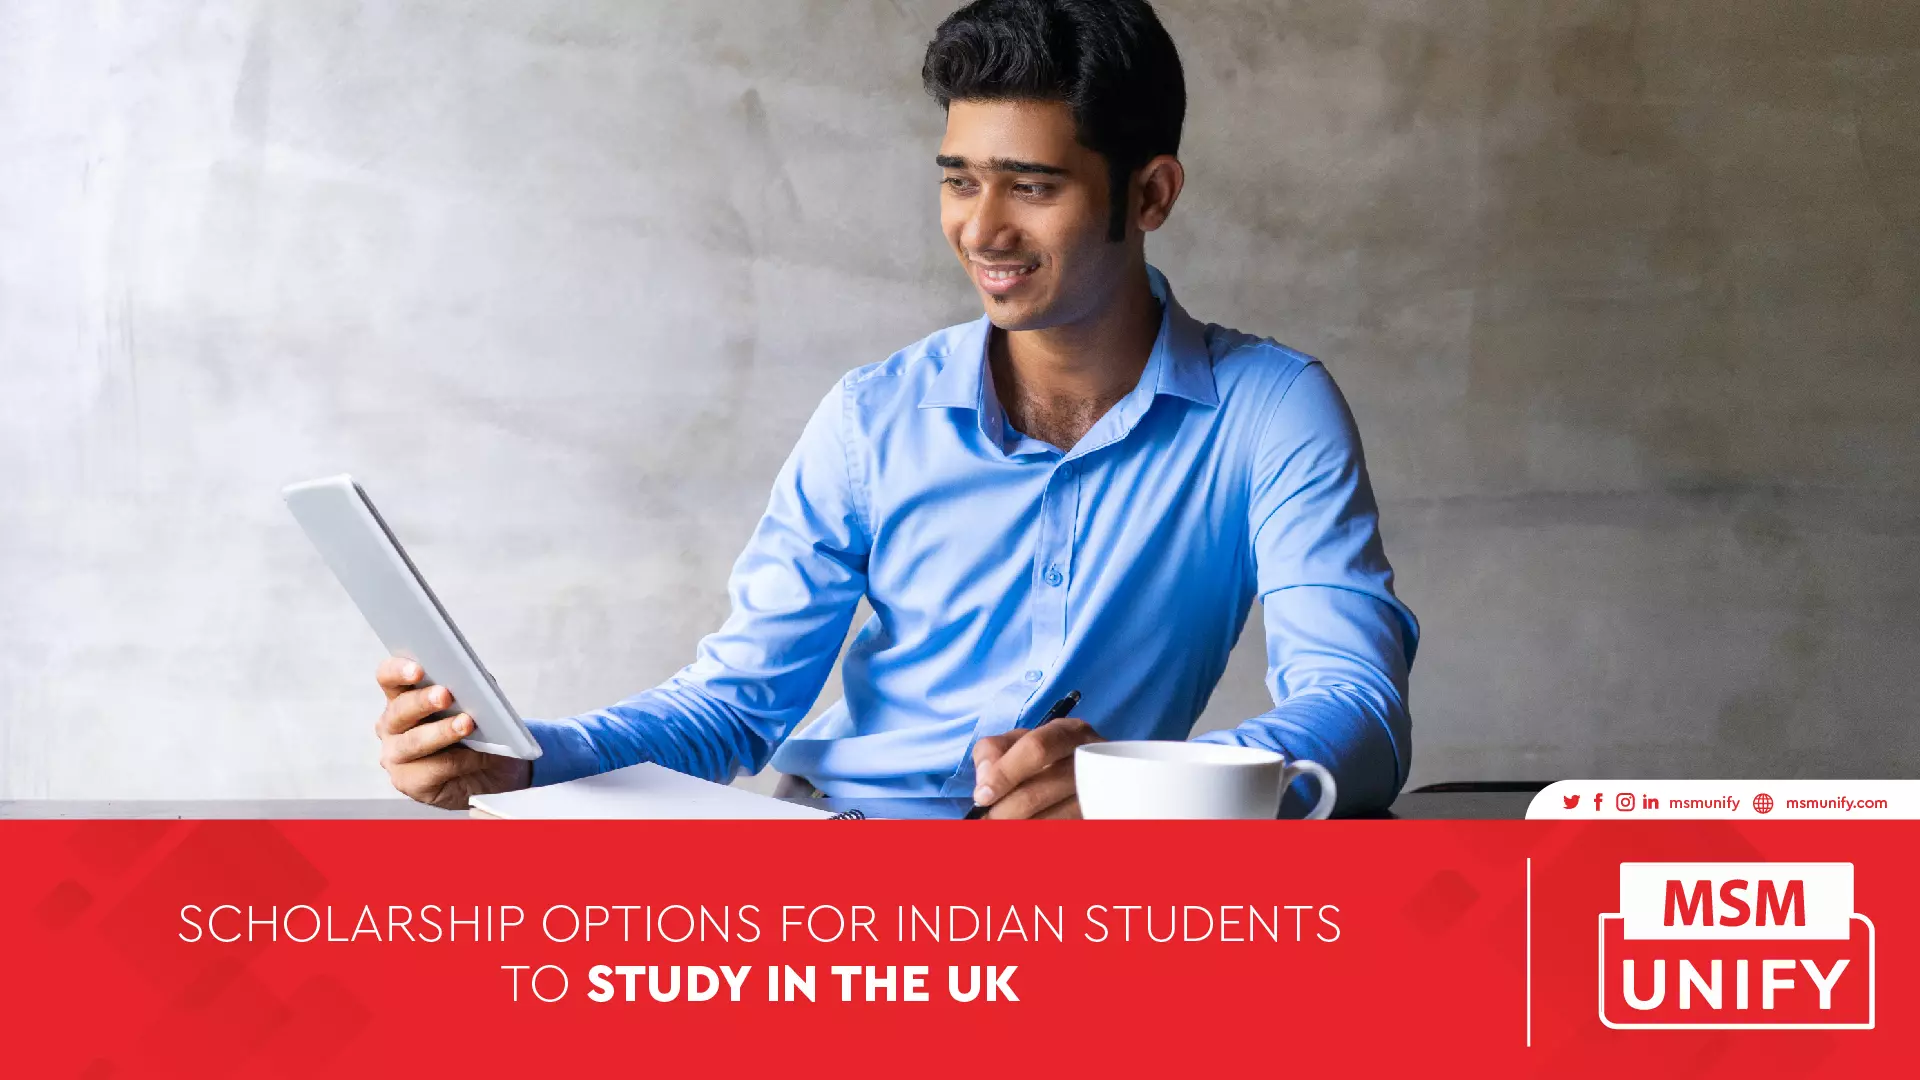 120722 MSM Unify  Scholarship options for Indian Students to Study in the UK 01